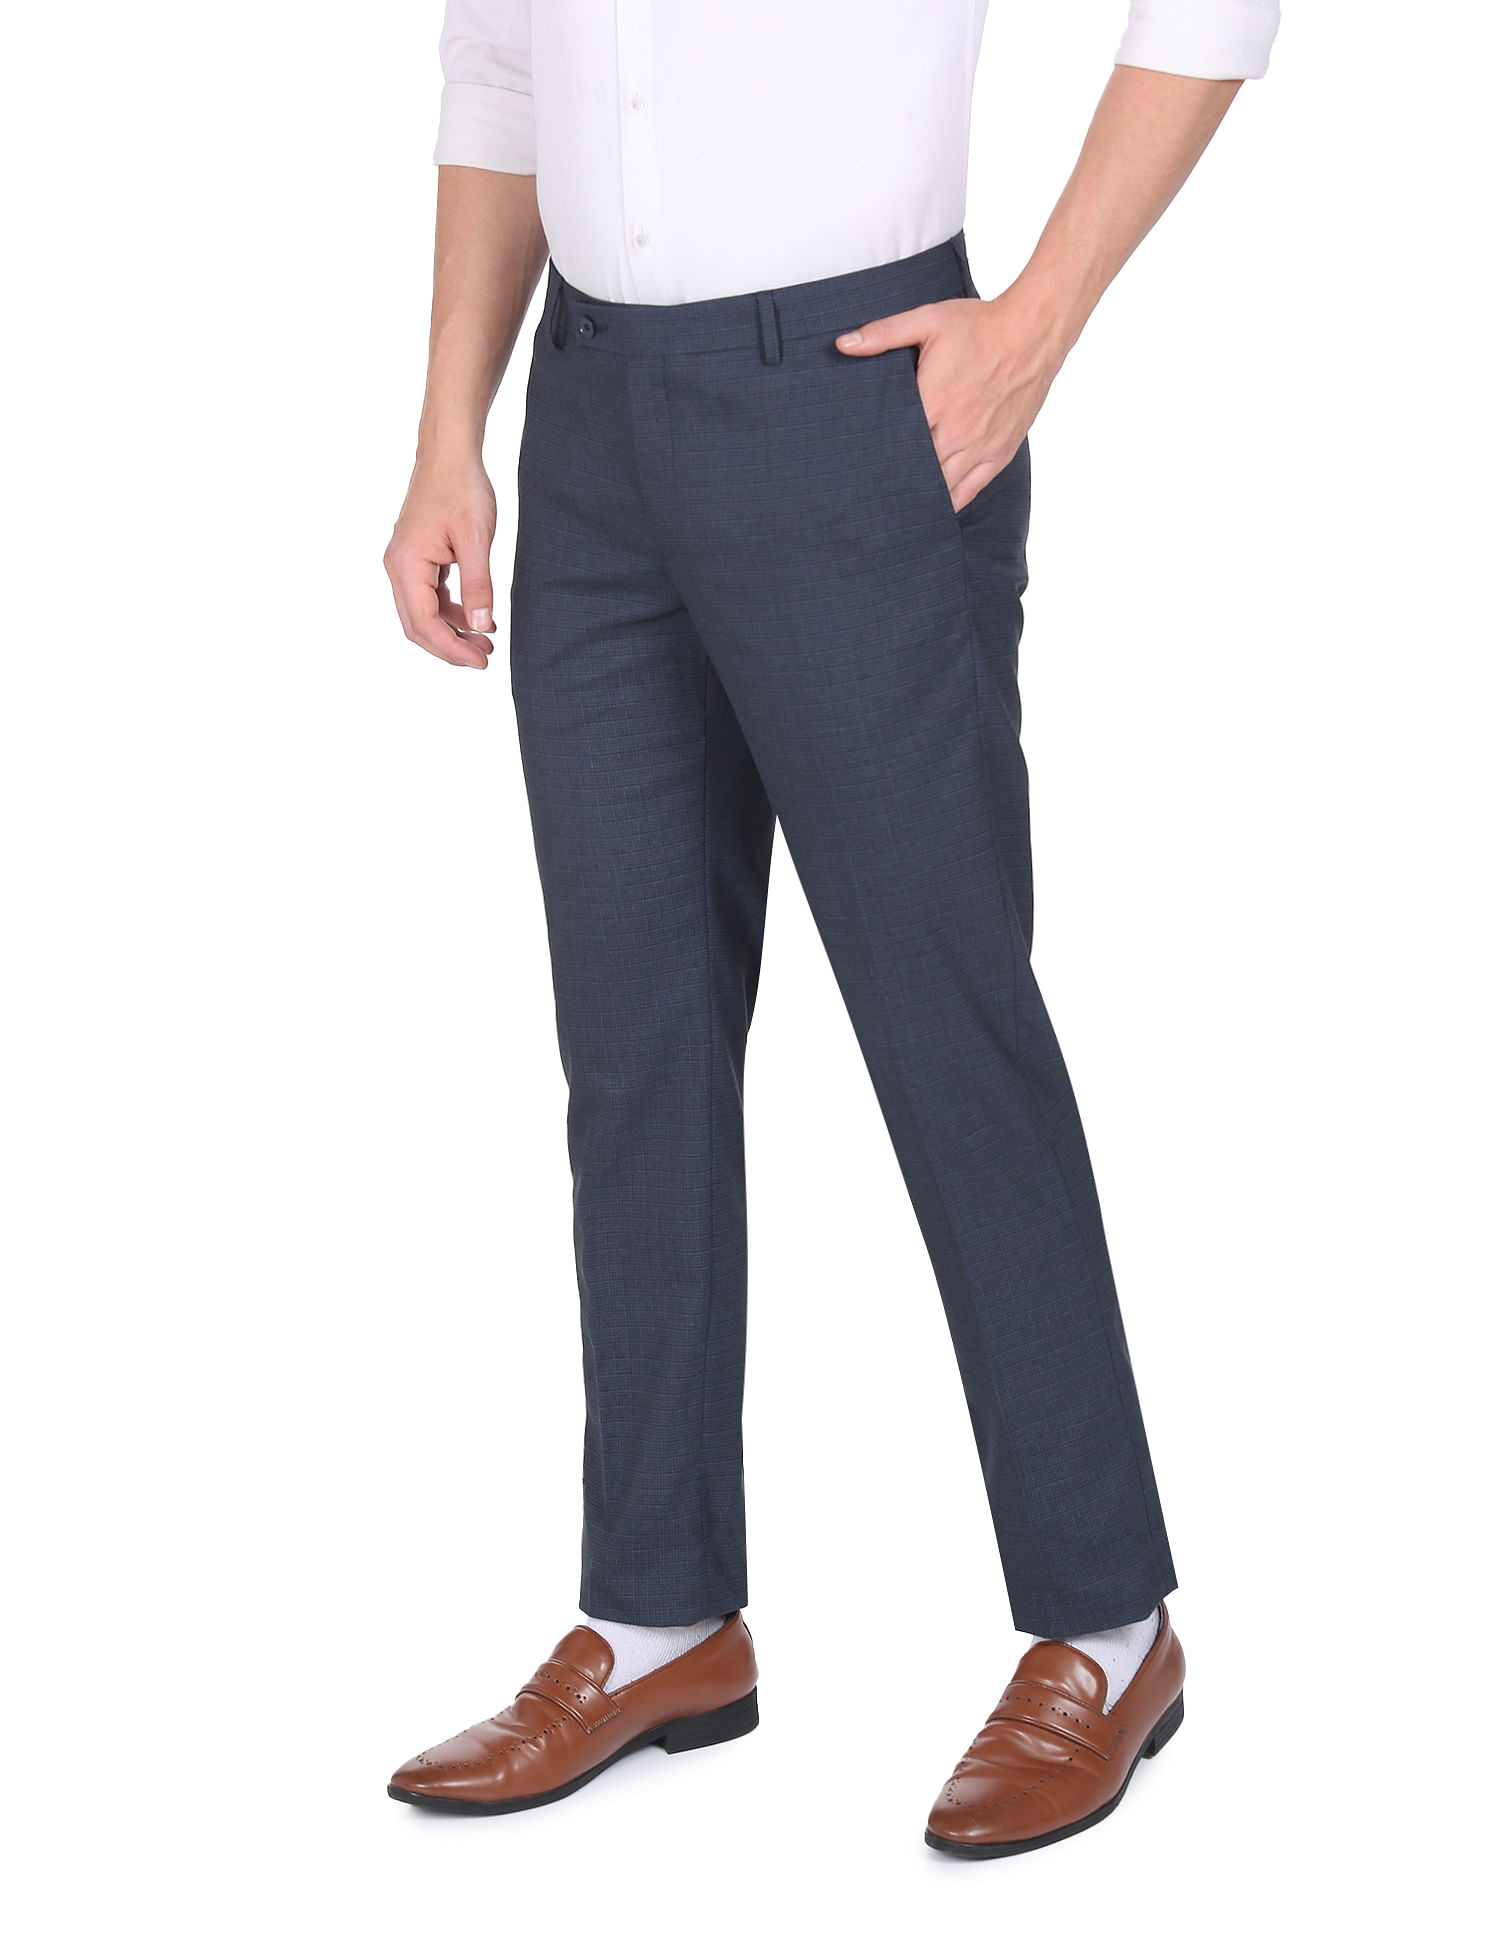 Buy Premium Formal Trousers For Men Online in India | SNTCH – SNITCH